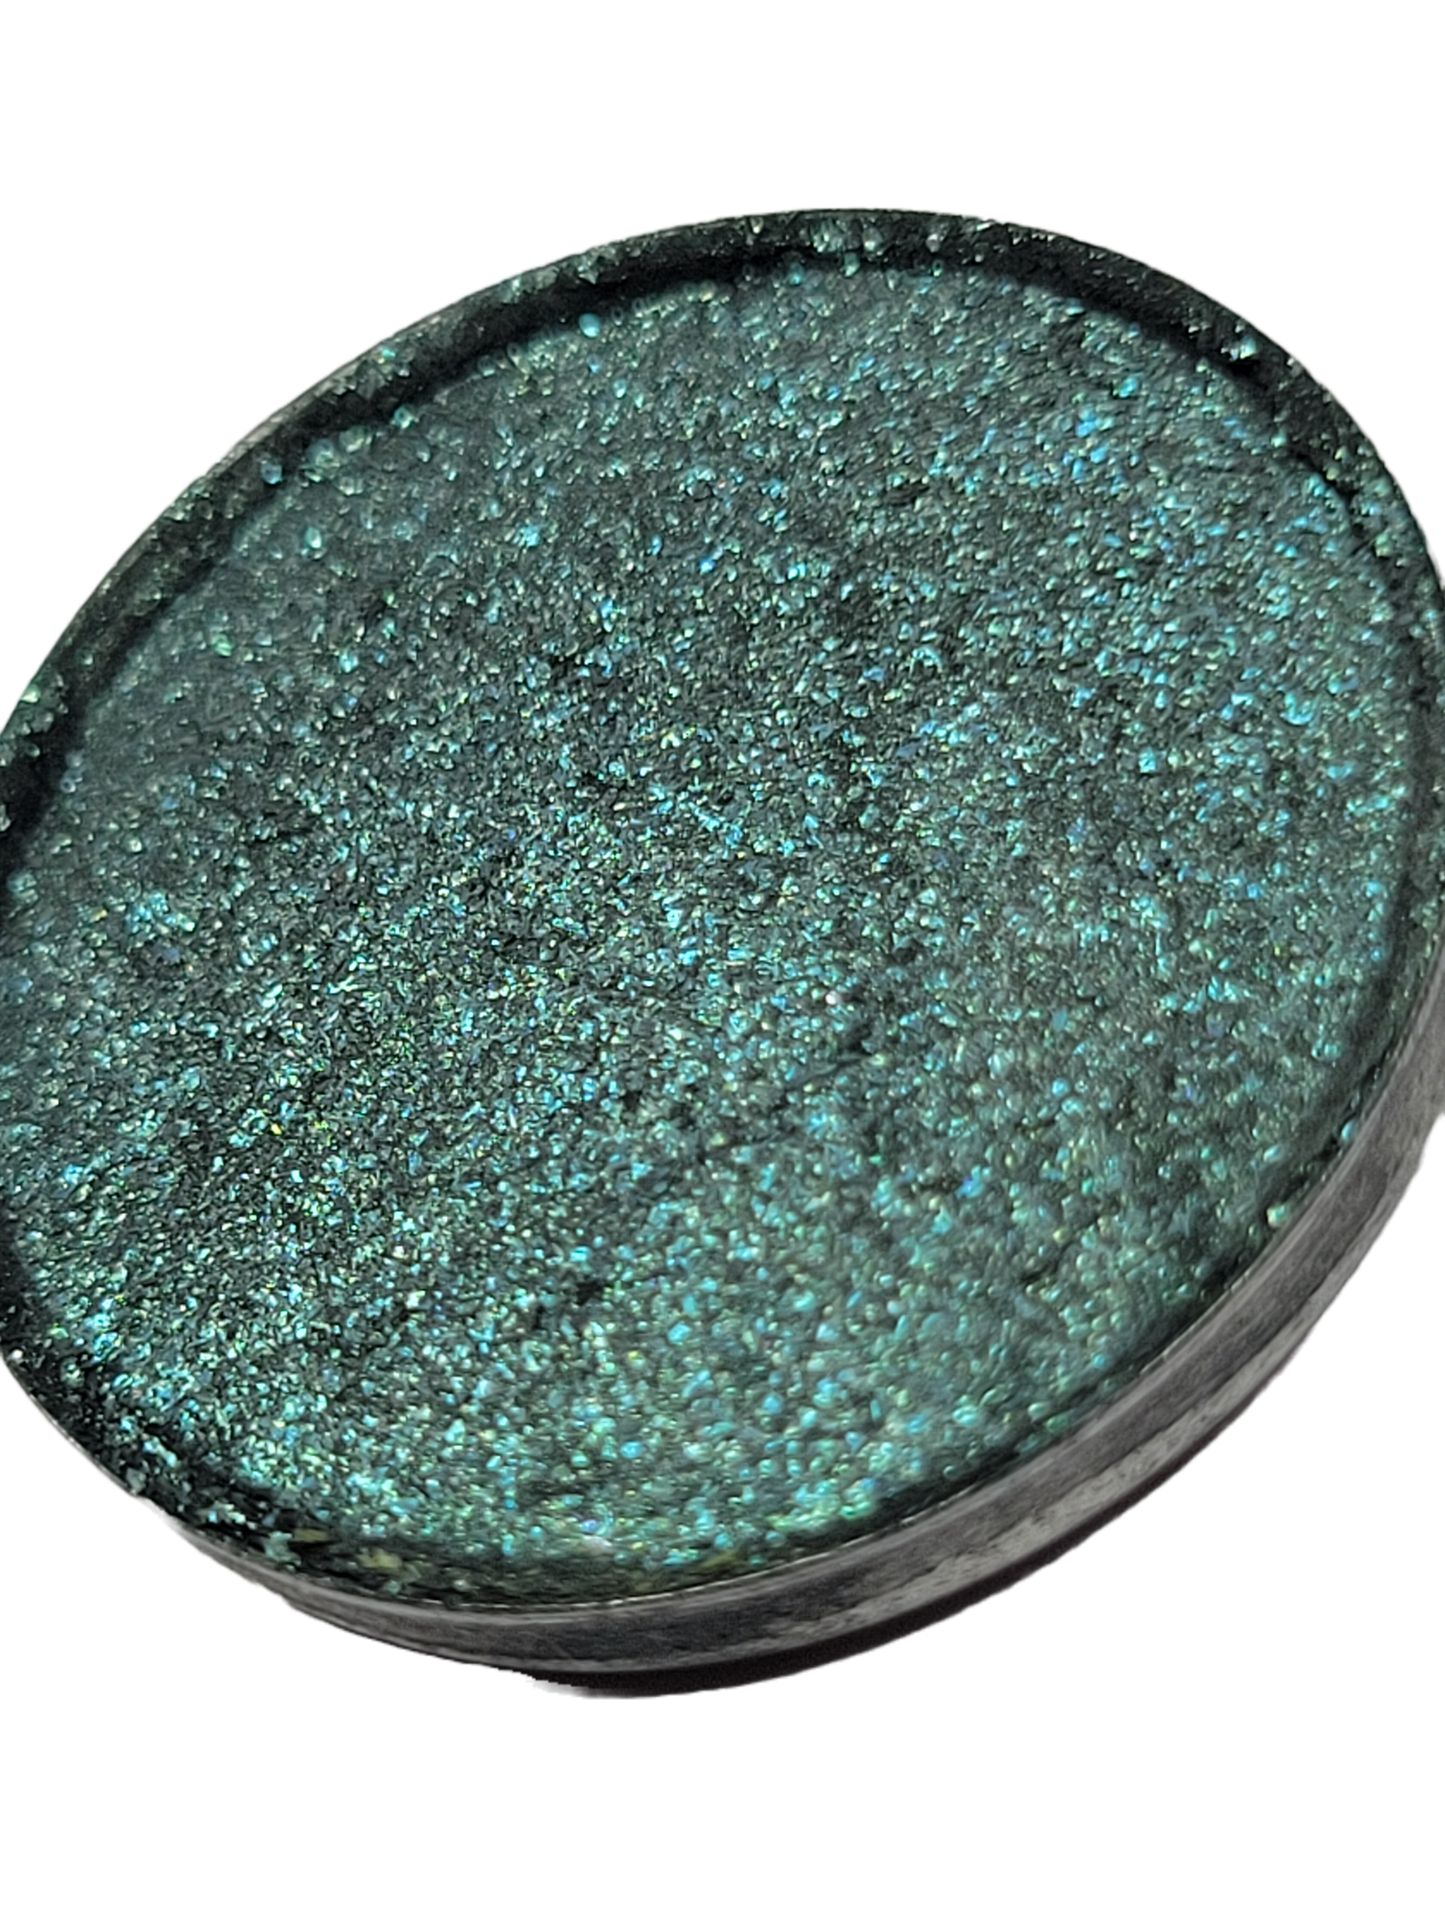 Buzzing Buffet - Eyeshadow Shimmer Greyish Green with Mint/Green/Teal Sparkles